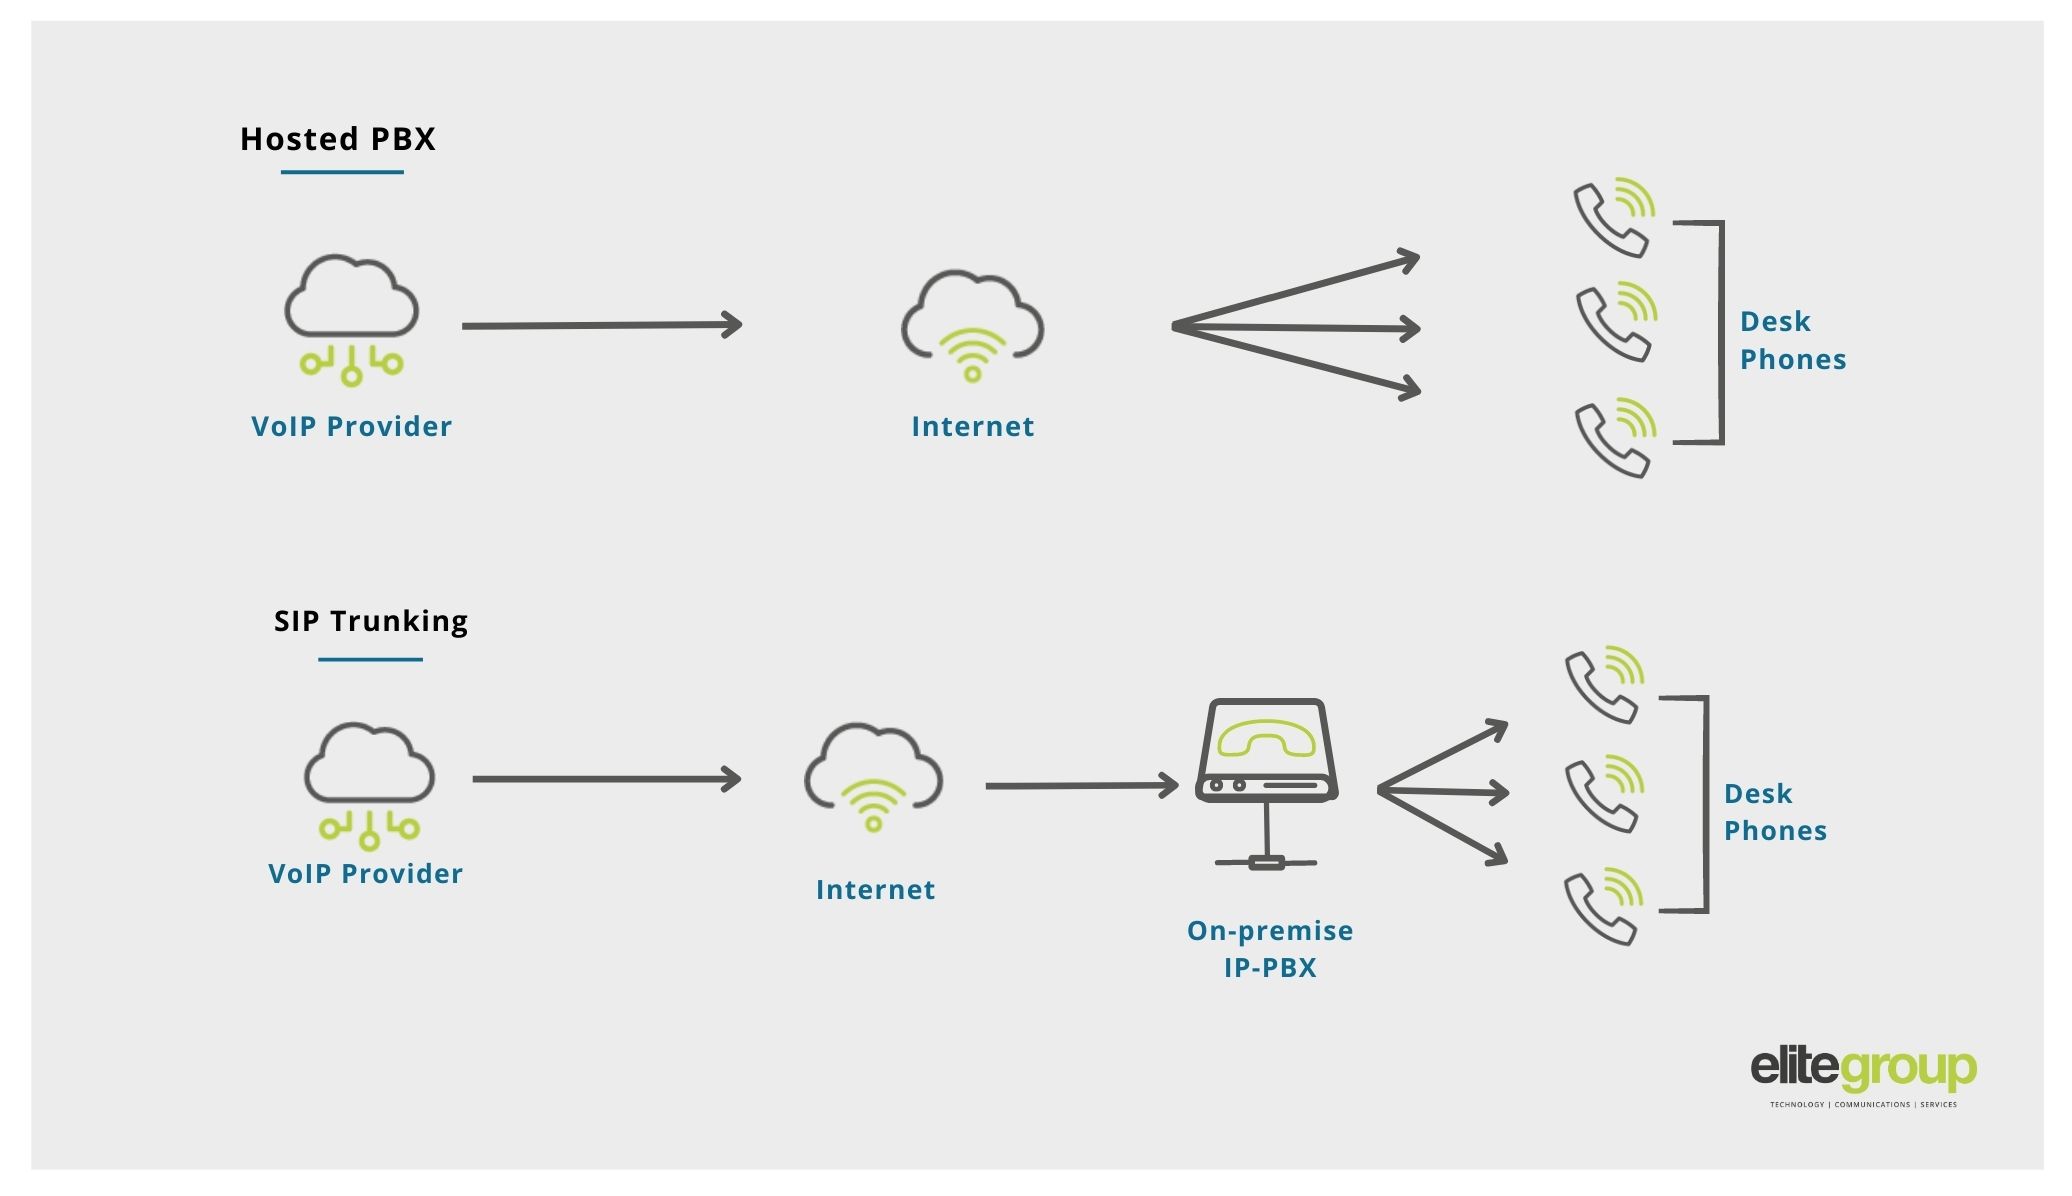 Diagram explaining the difference between Hosted PBX vs SIP Trunking